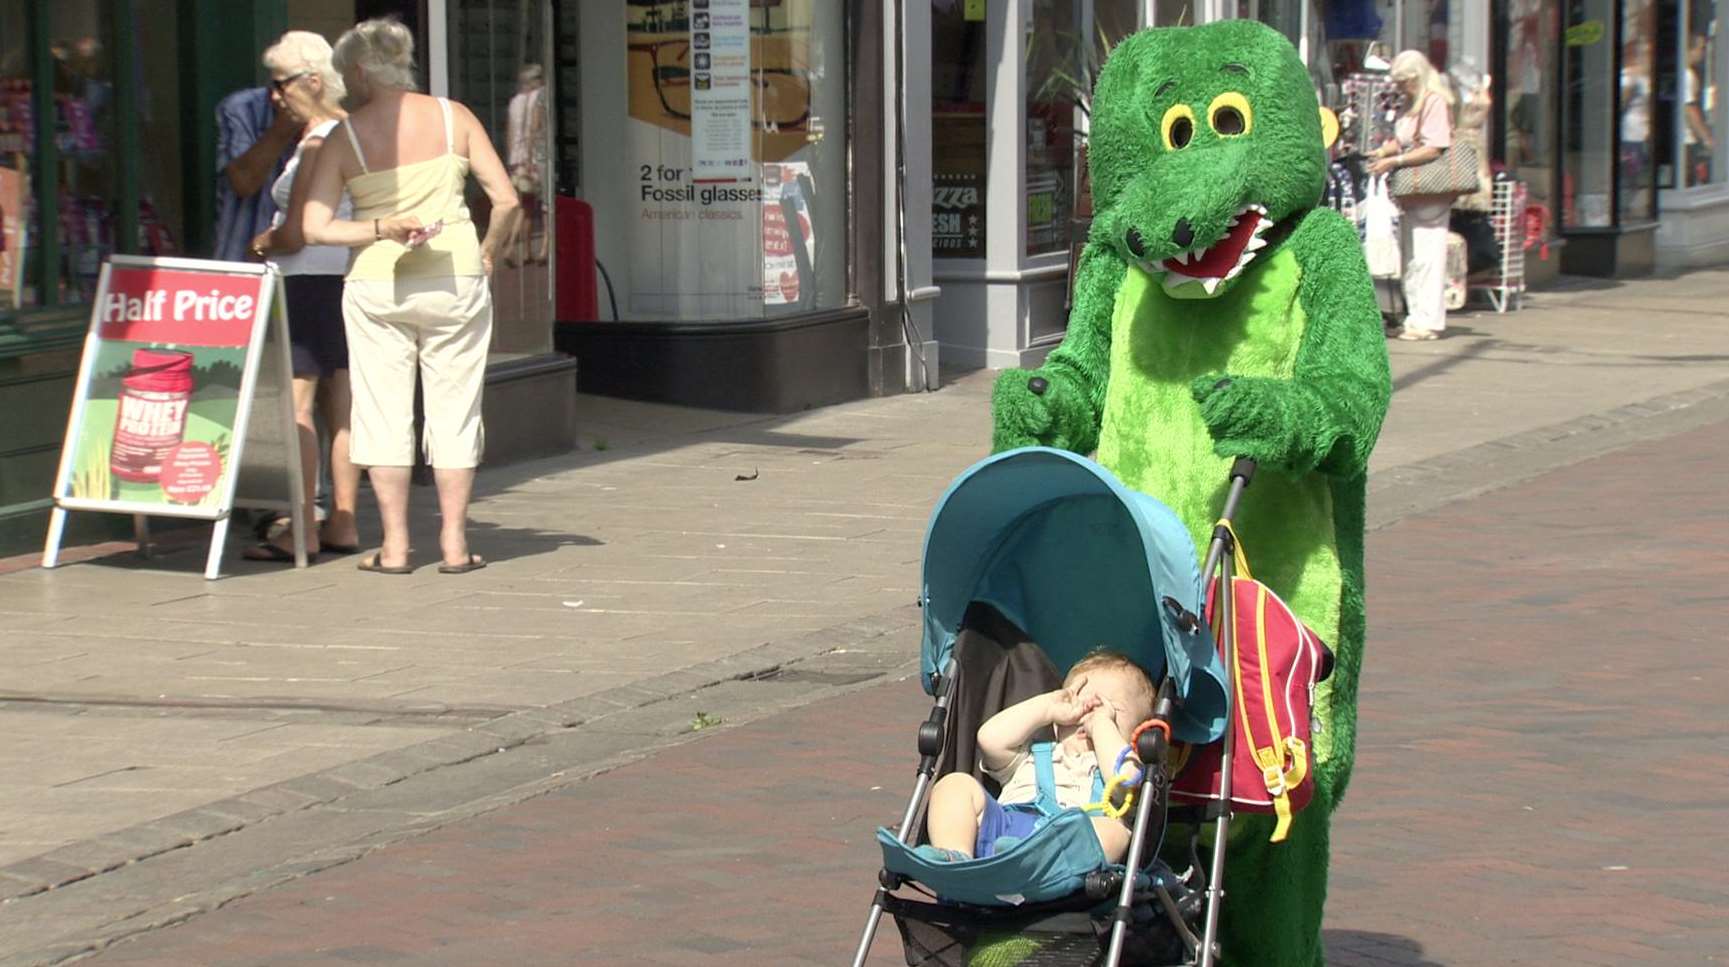 Bethany Luney walks through Canterbury in a monster suit